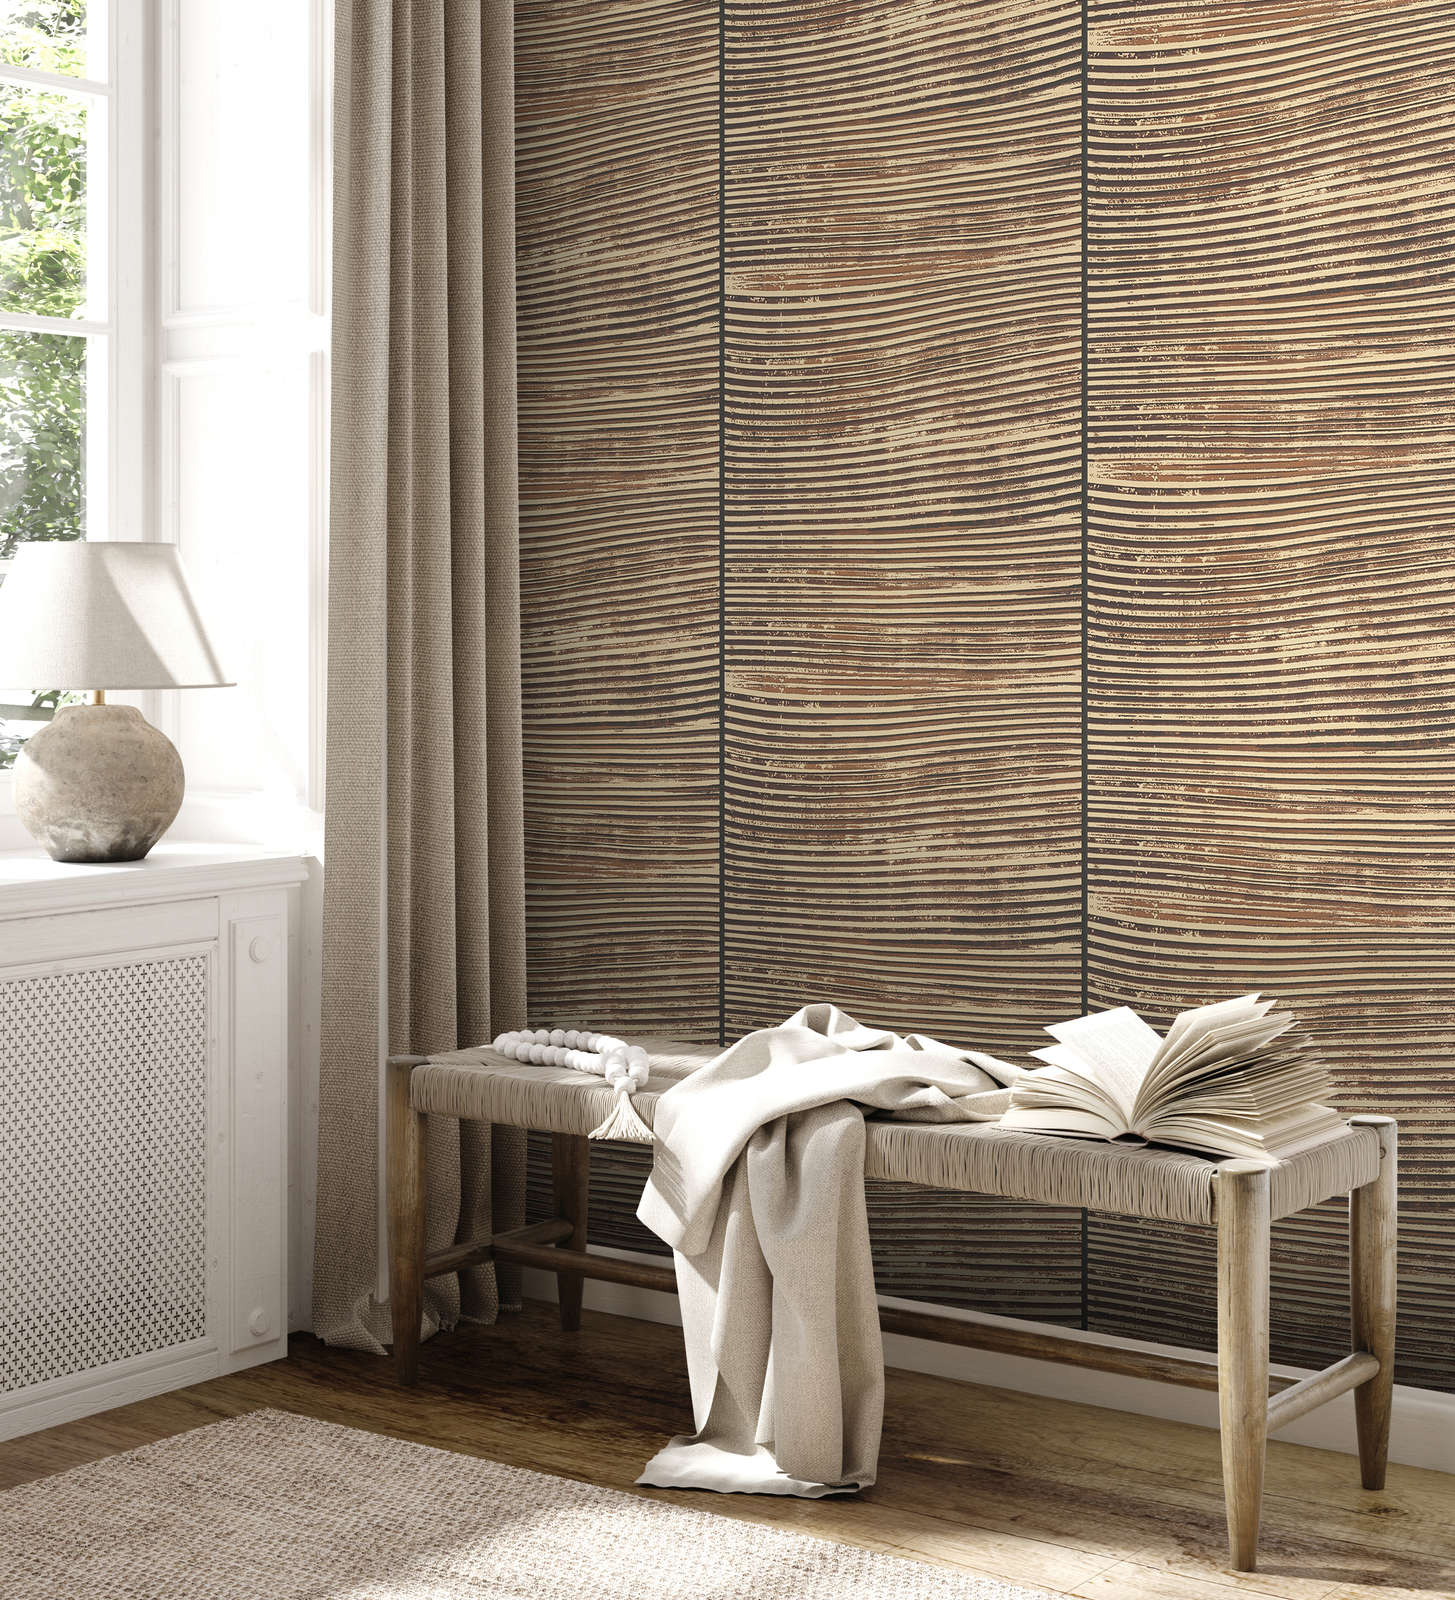             Non-woven wallpaper with modern spatula-look pattern - brown, beige
        